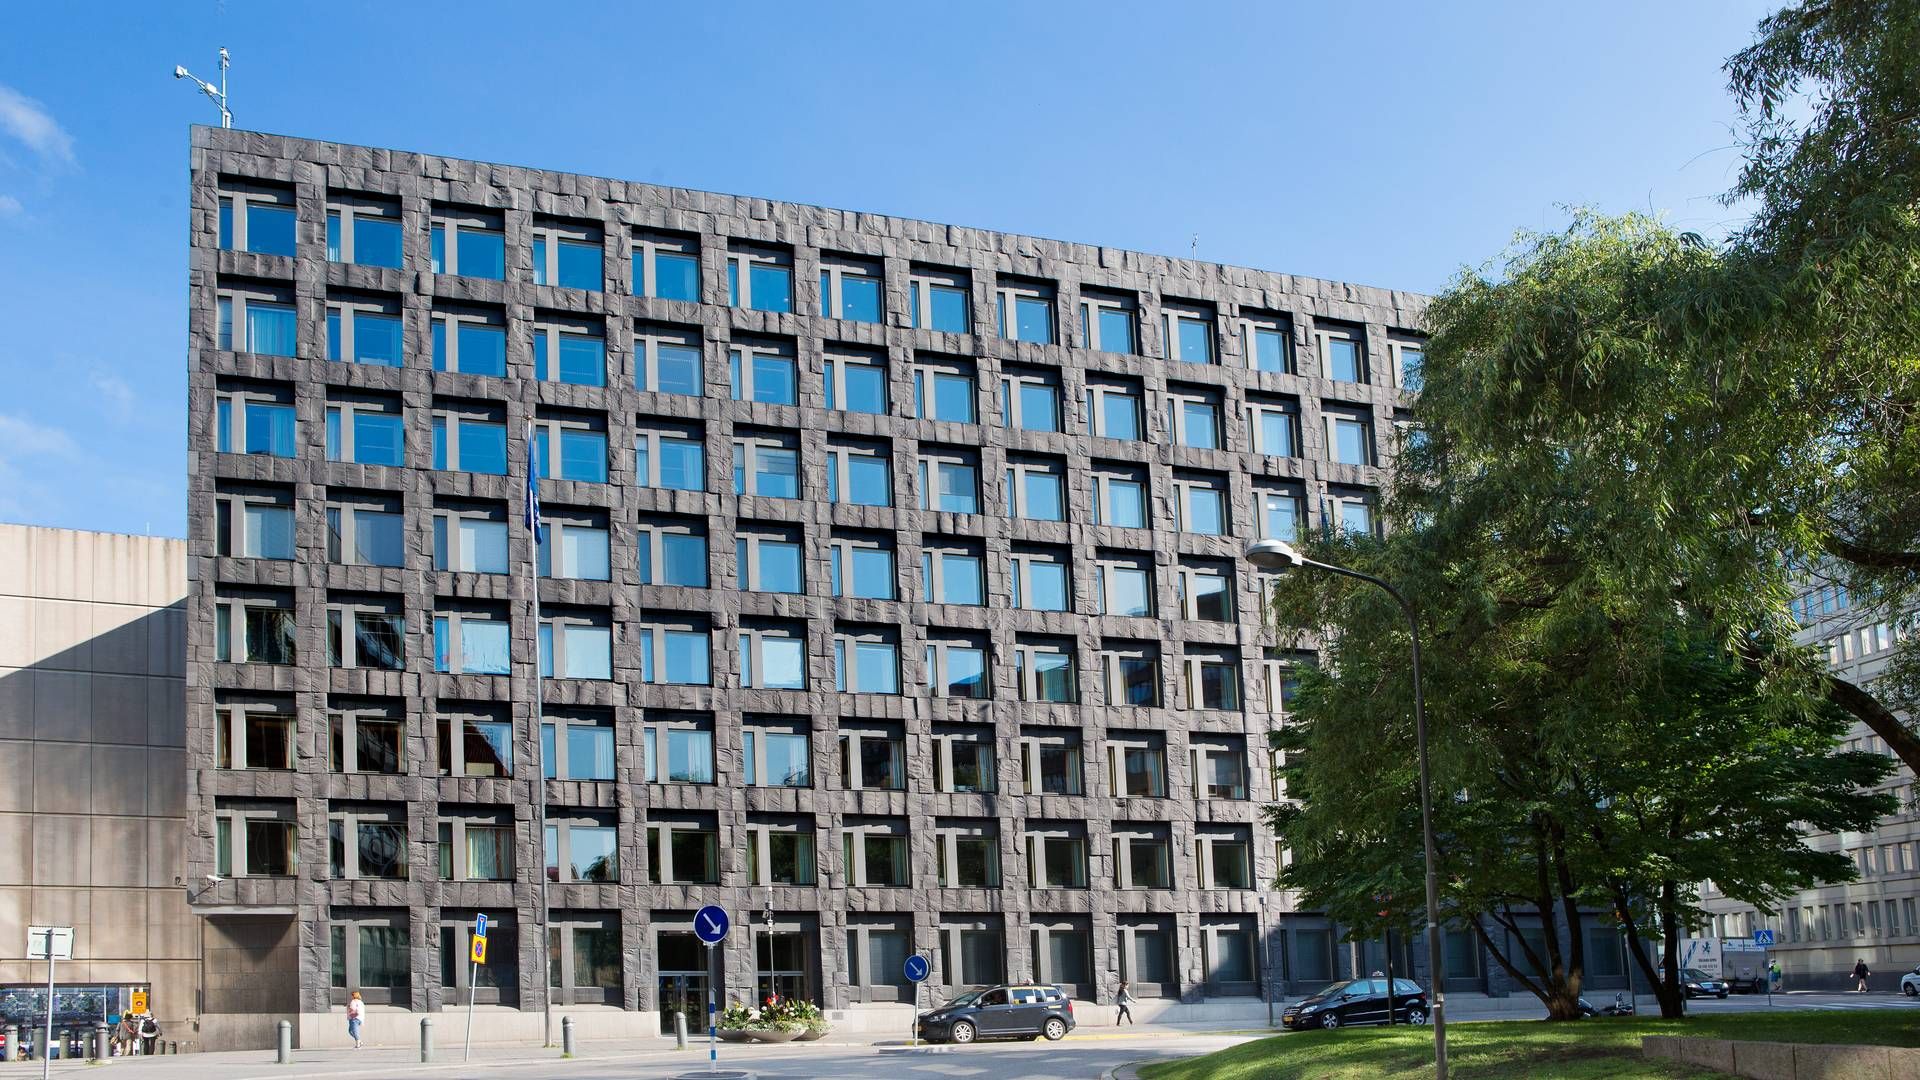 Sweden's Rigsbank was established in 1668 under the name "Rikets Ständers Bank" (the bank of the parliament) and is considered the world's oldest central bank. | Photo: Riksbank